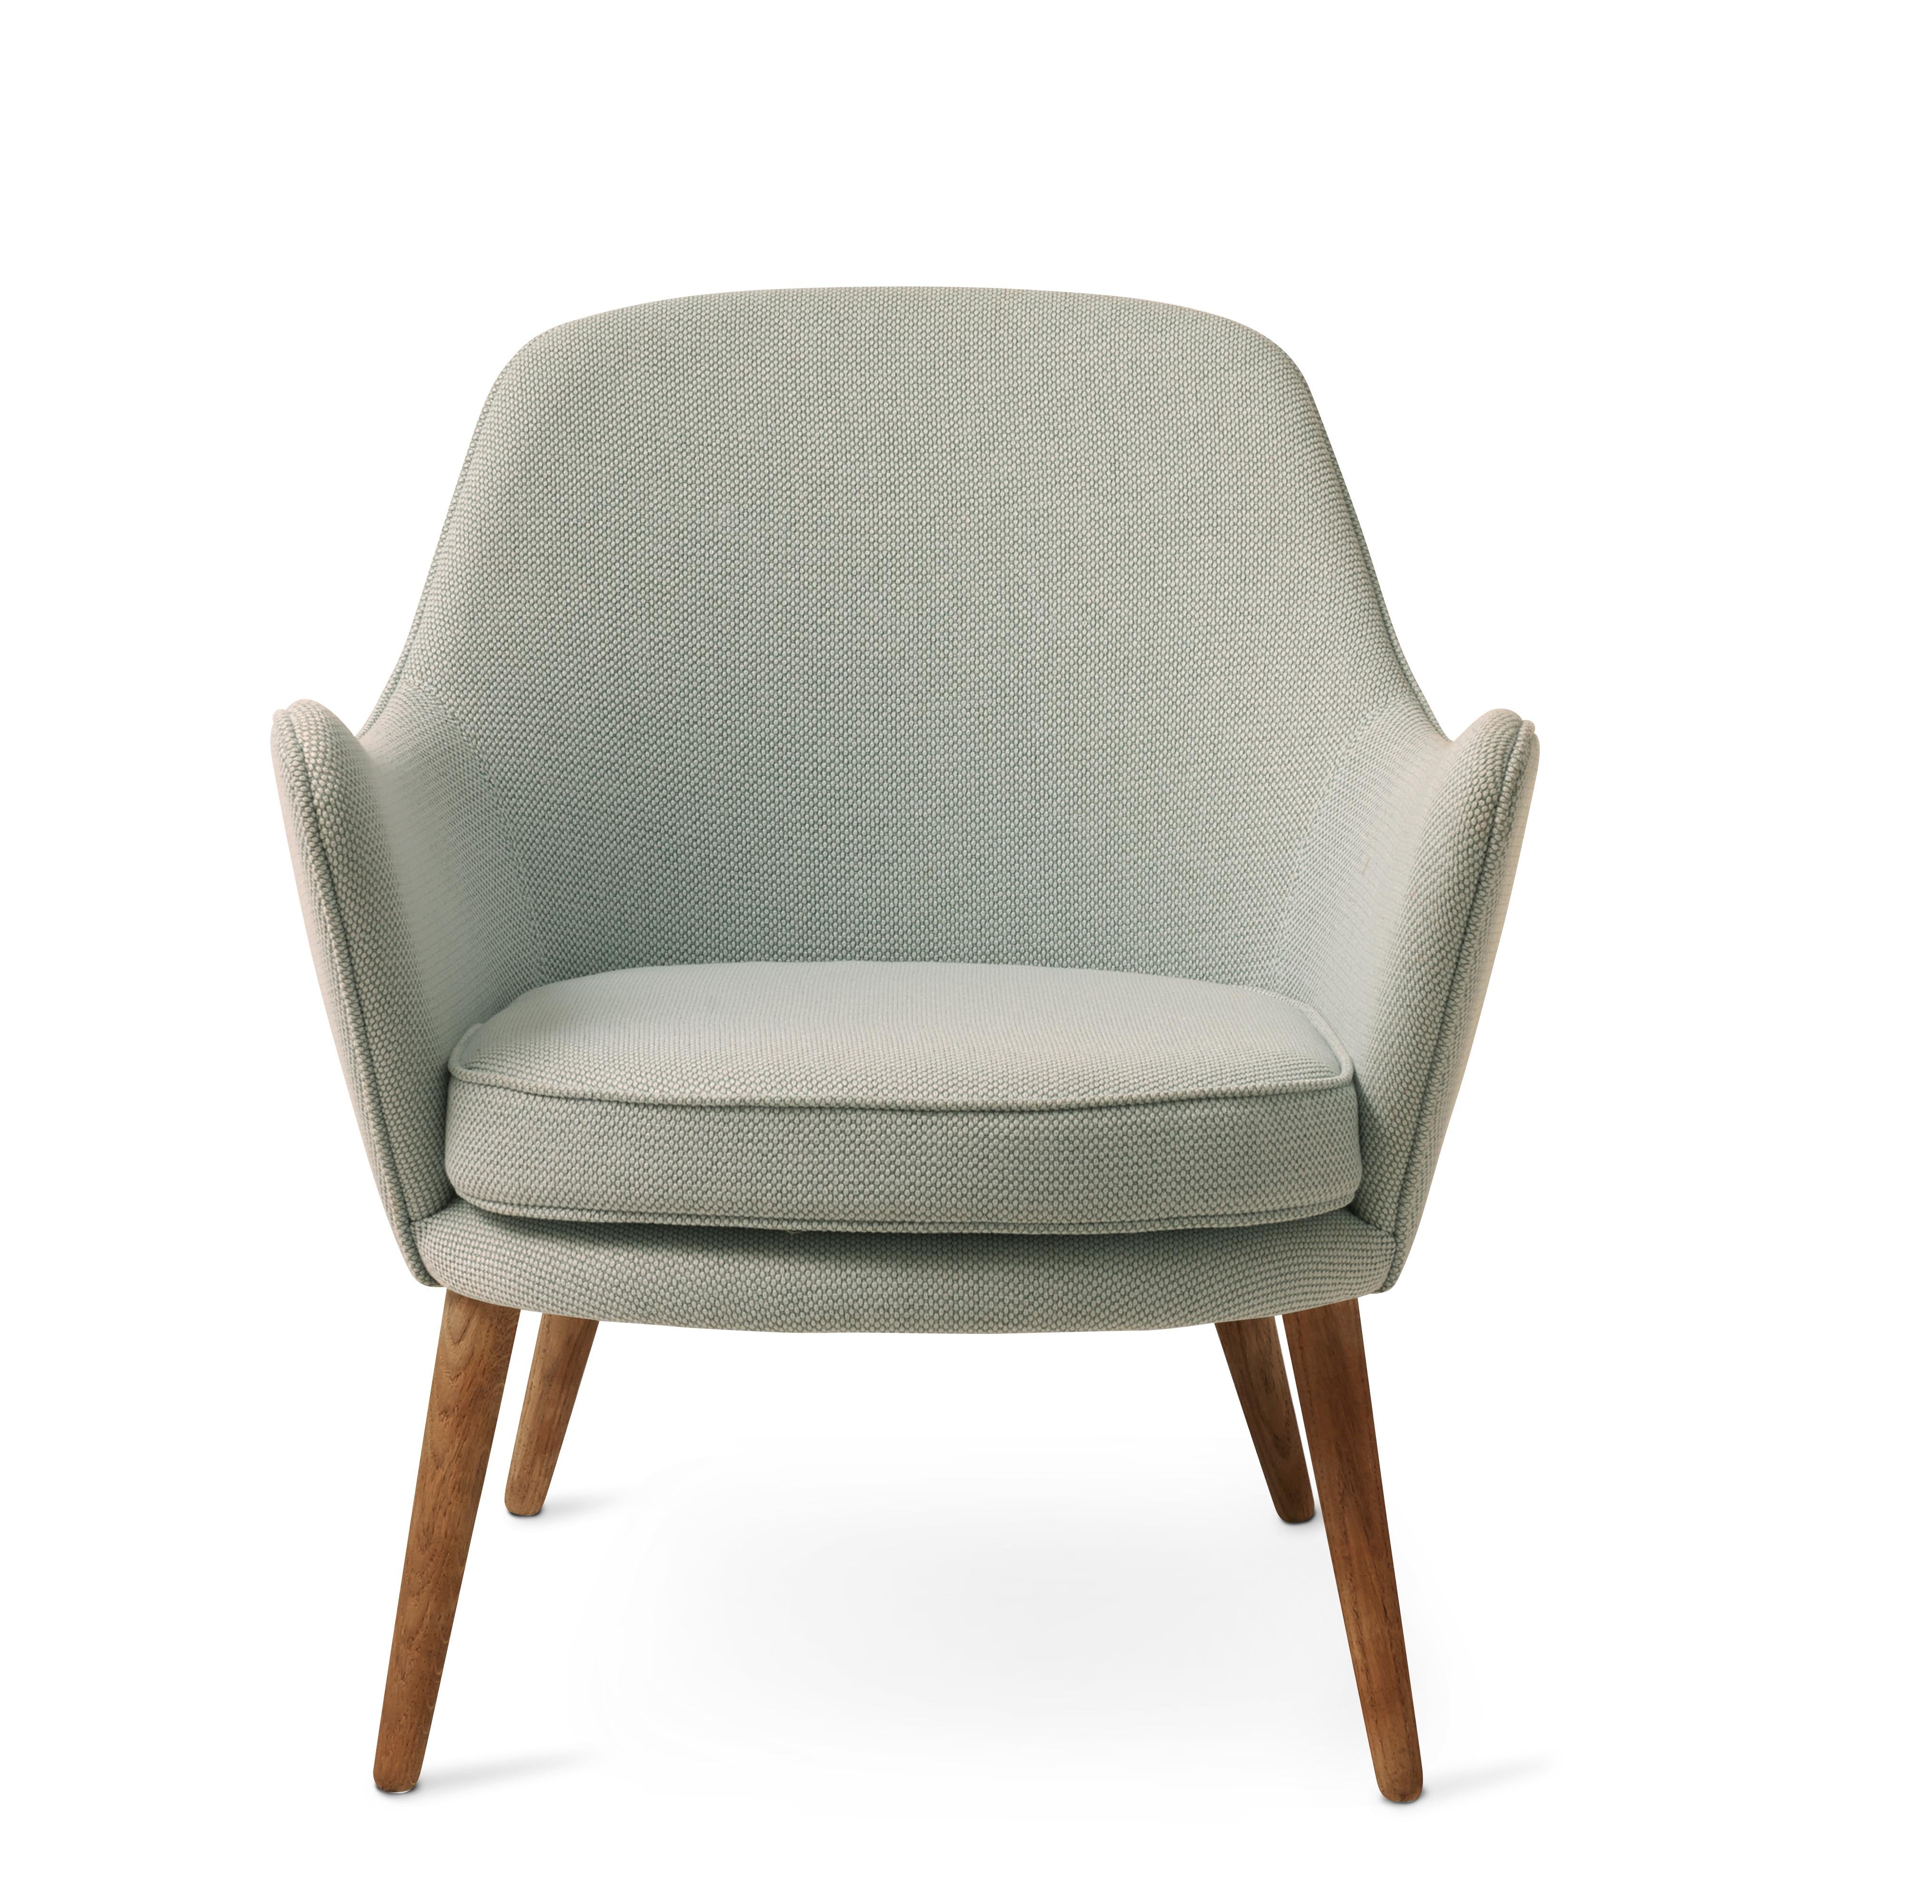 For Sale: Gray (Merit021/Merit021) Dwell Lounge Chair, by Hans Olsen from Warm Nordic